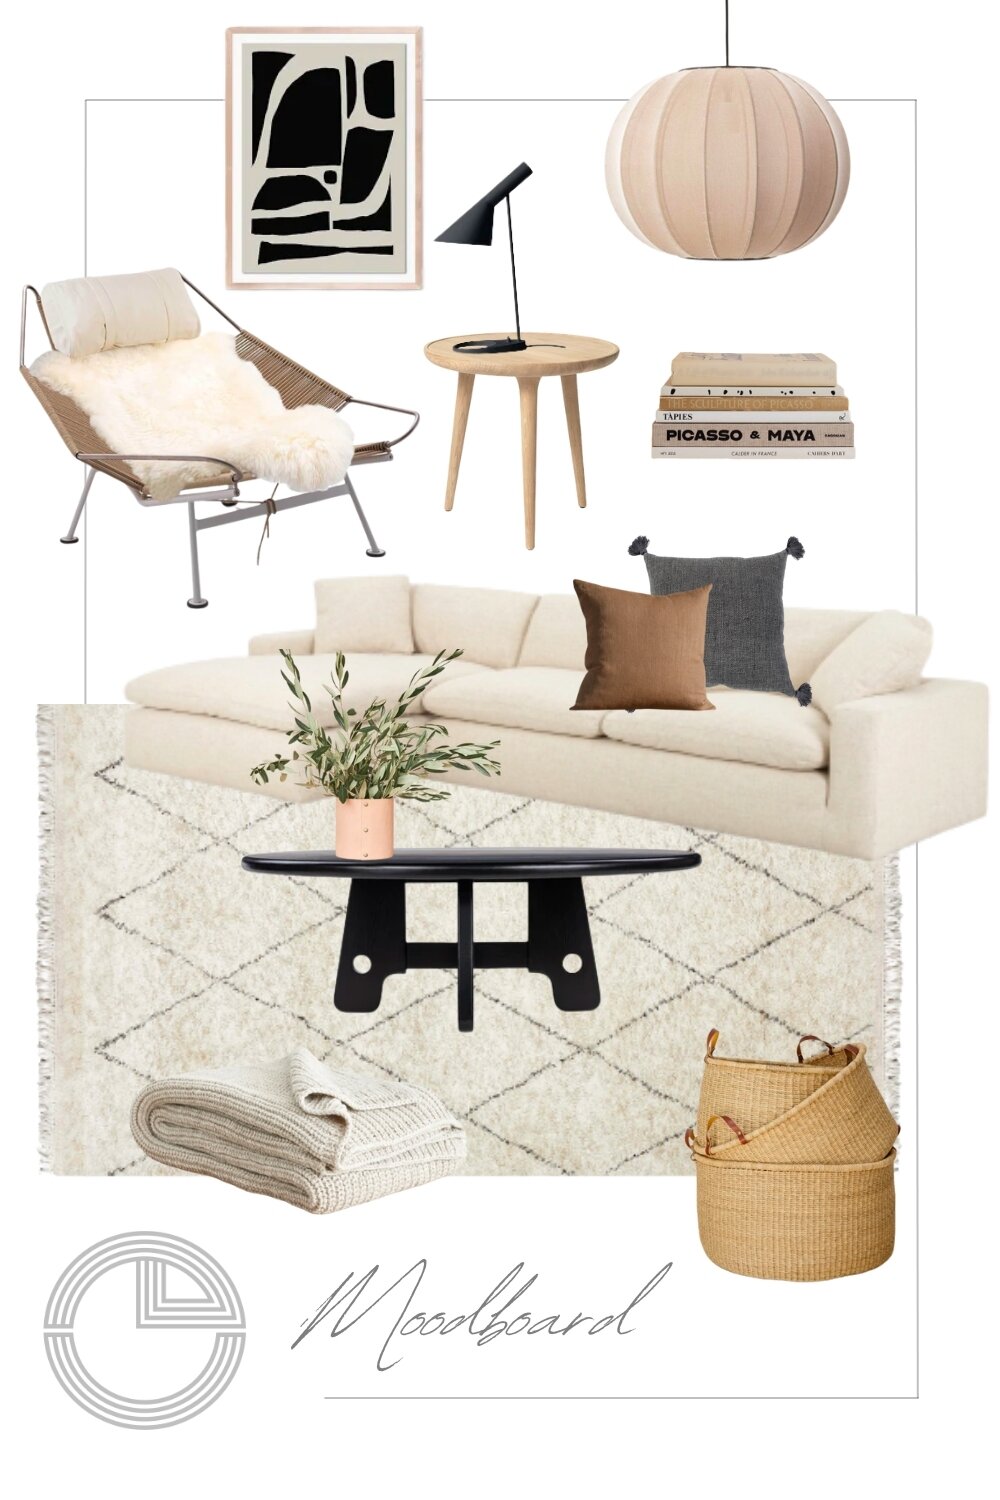 Some fun moodboards for a modern furniture project. While we LOVE working on construction and remodels, we also tackle furnishings only projects. 

When focusing on furnishings for a project, you have the chance to curate a space that not only looks 